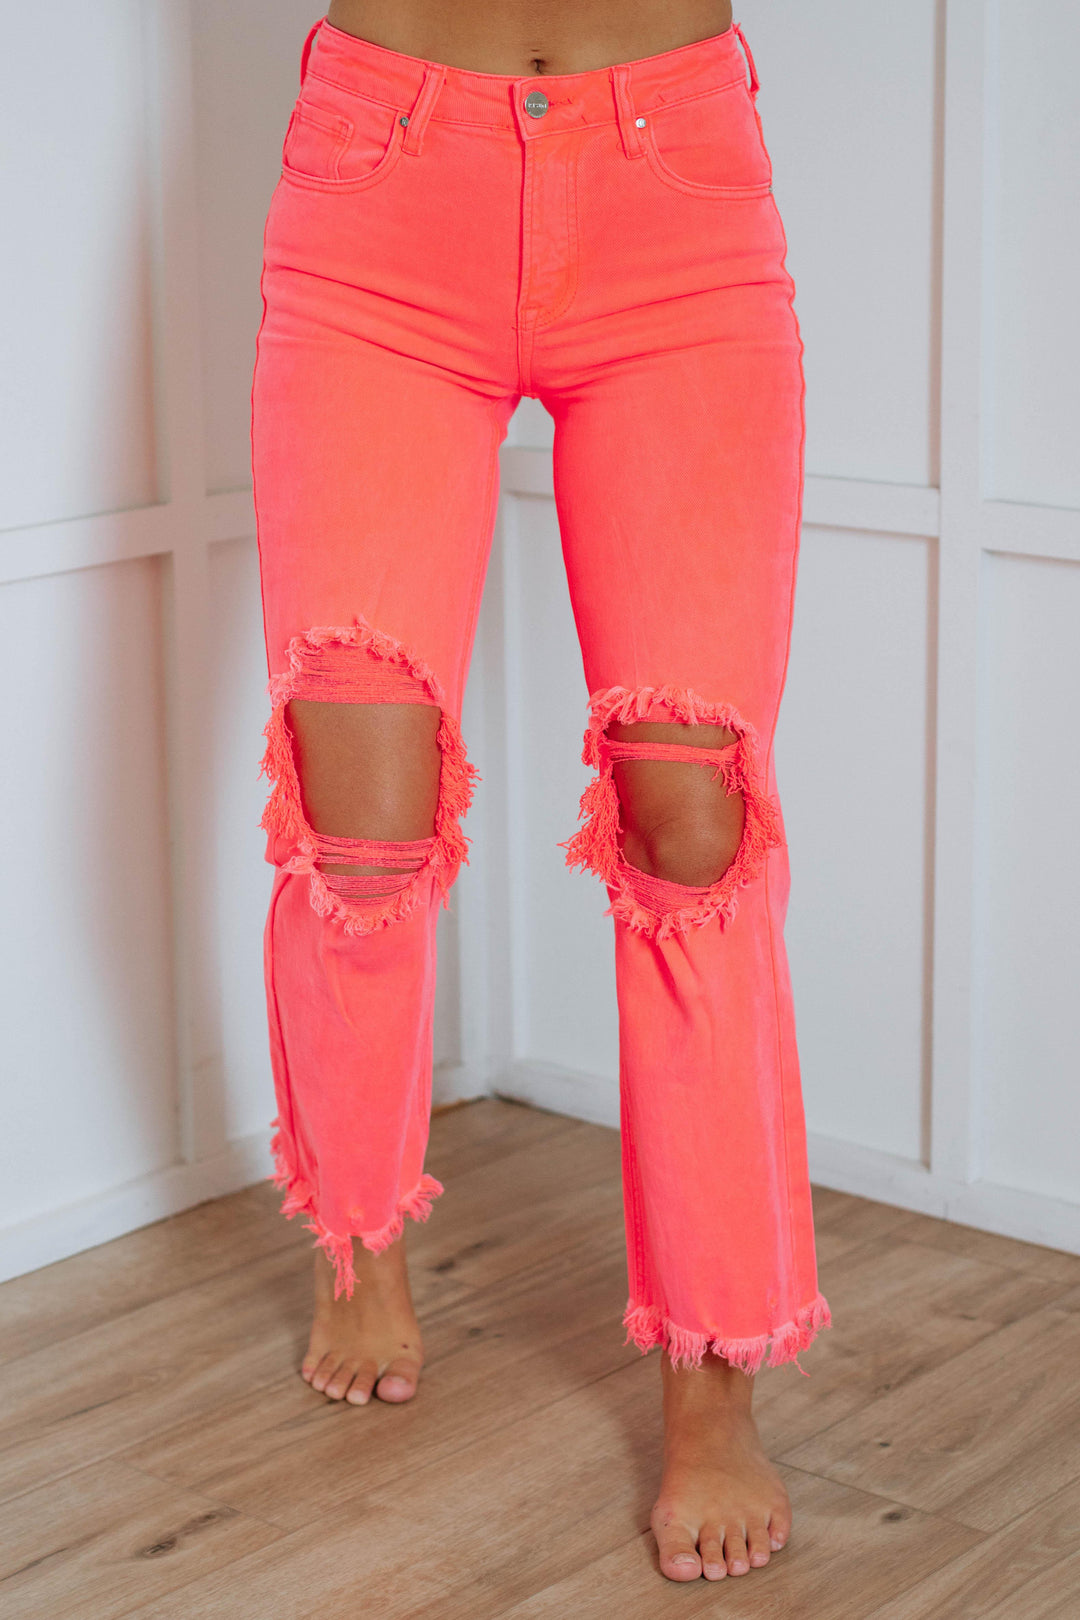 Willow Risen Jeans - Neon Coral